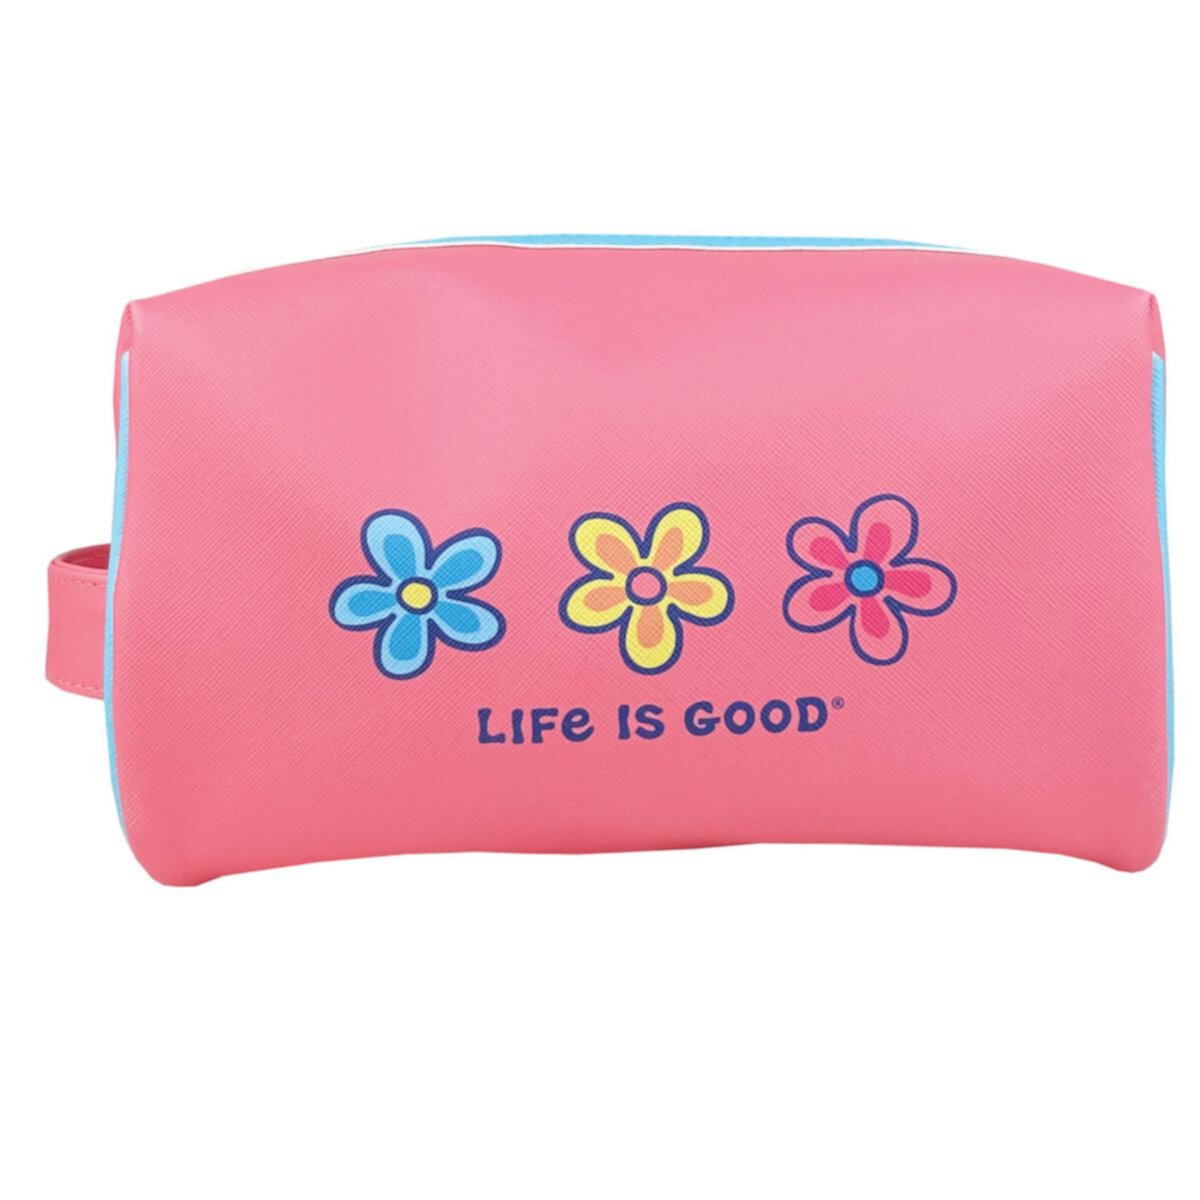 Life is Good Square Cosmetics Bag Life is Good